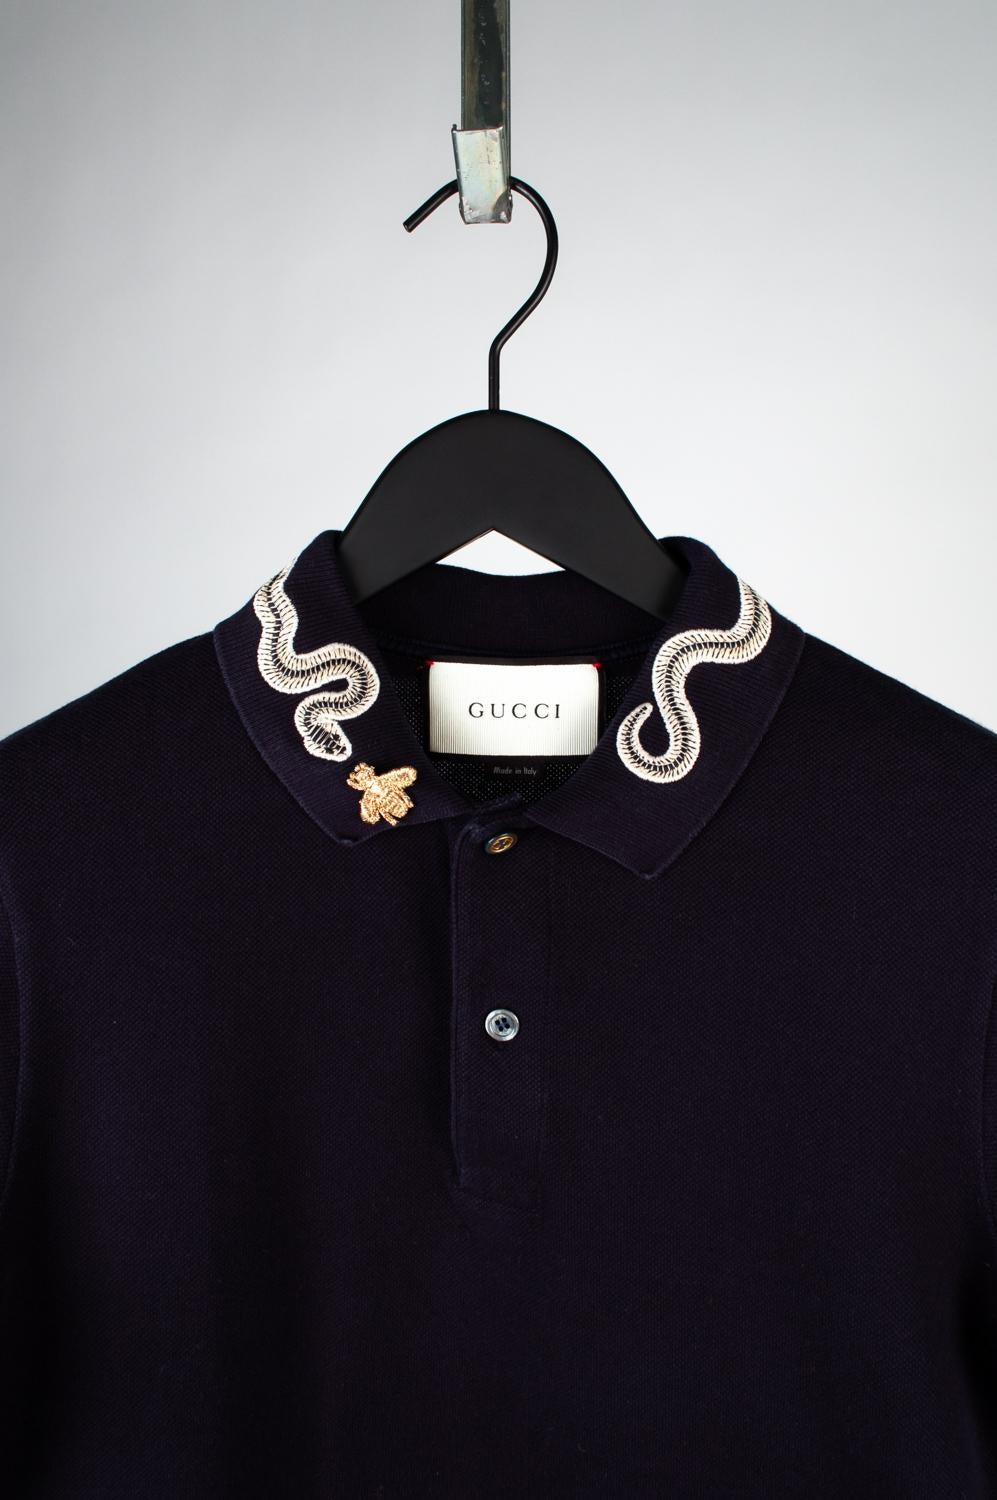 100% genuine Gucci slim men polo shirt, S601
Color: blue
(An actual color may a bit vary due to individual computer screen interpretation)
Material: 93% cotton, 7% elastane
Tag size: Small
This jumper is great quality item. Rate 8.5 of 10, excellent